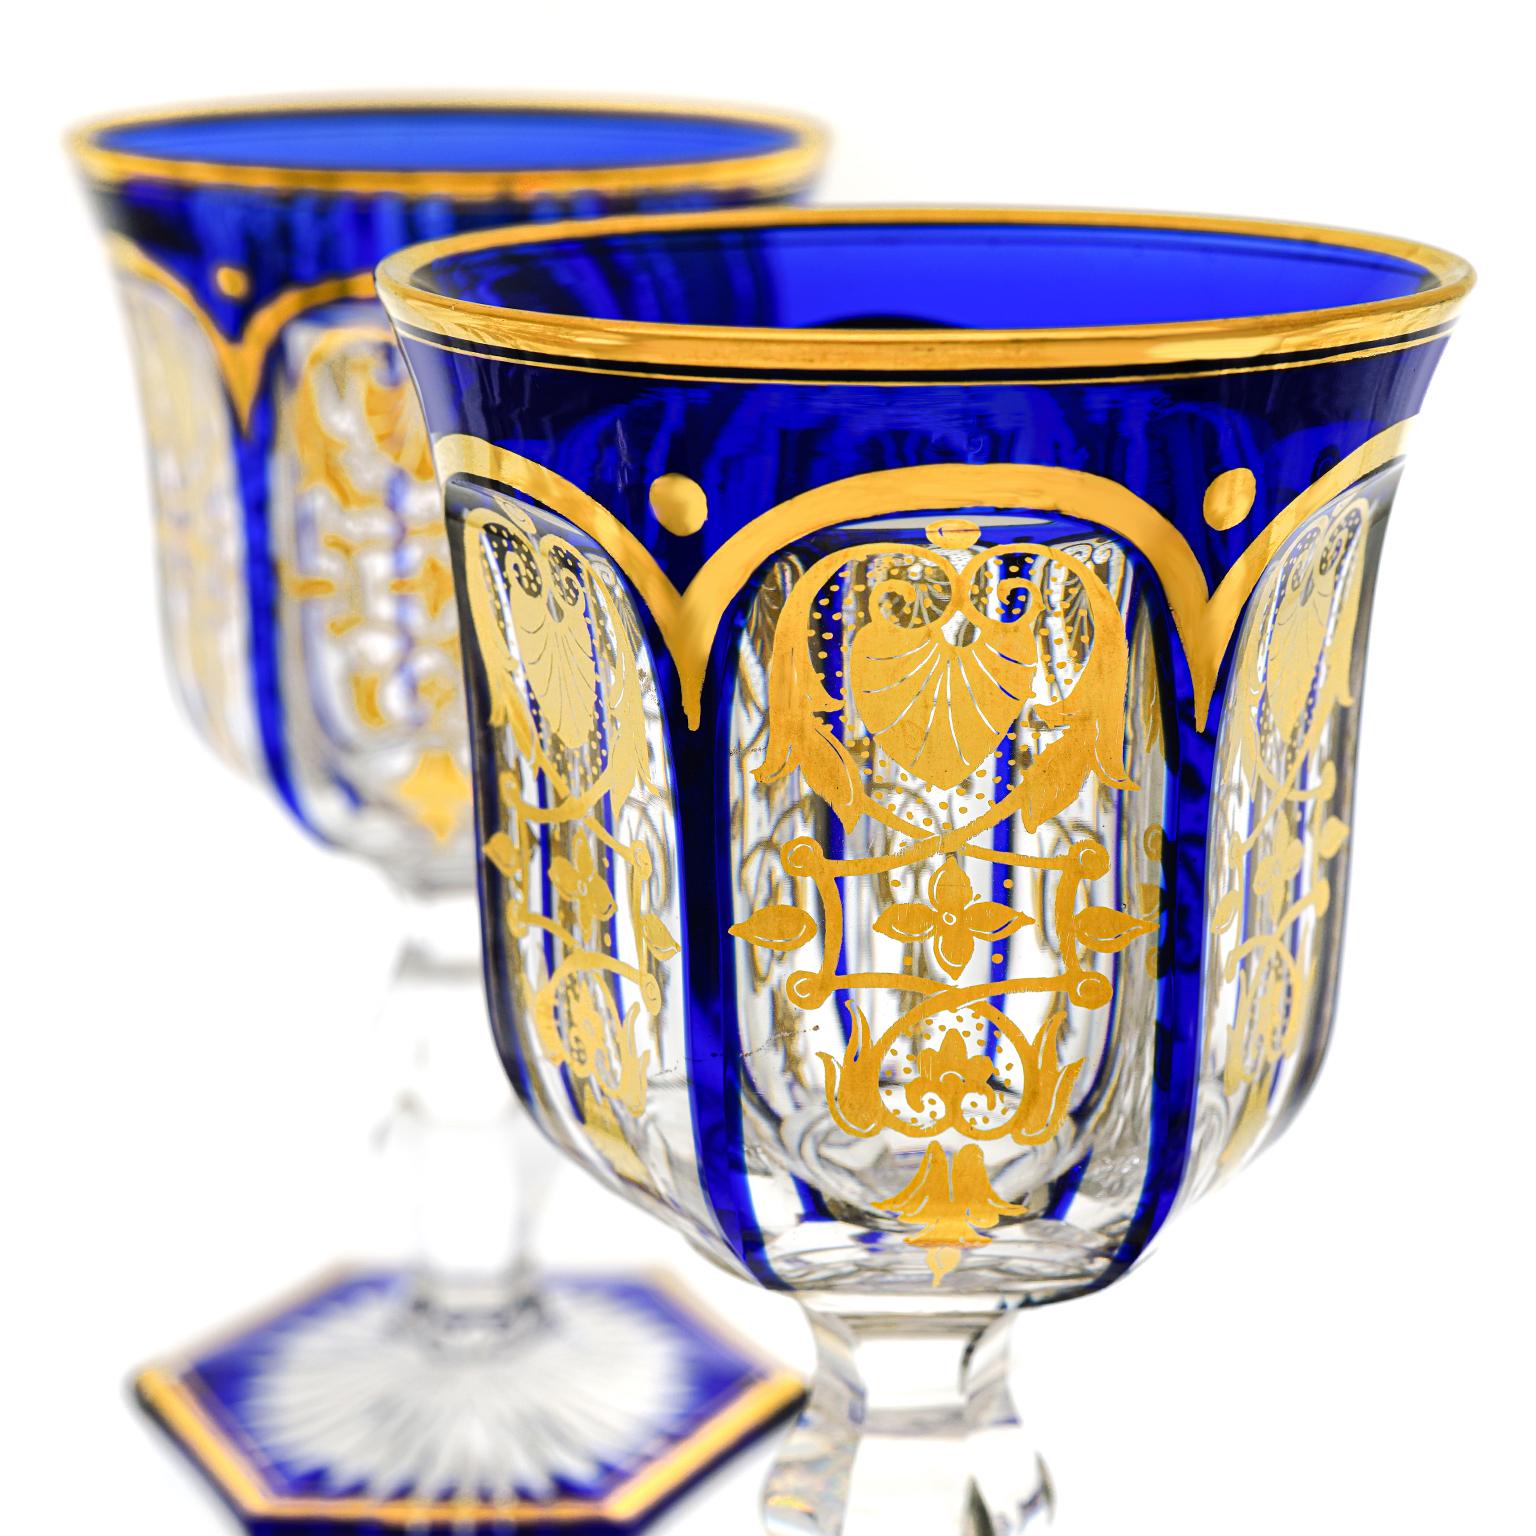 Set of 10 Cobalt Empire by Baccarat Goblets In Excellent Condition For Sale In Litchfield, CT